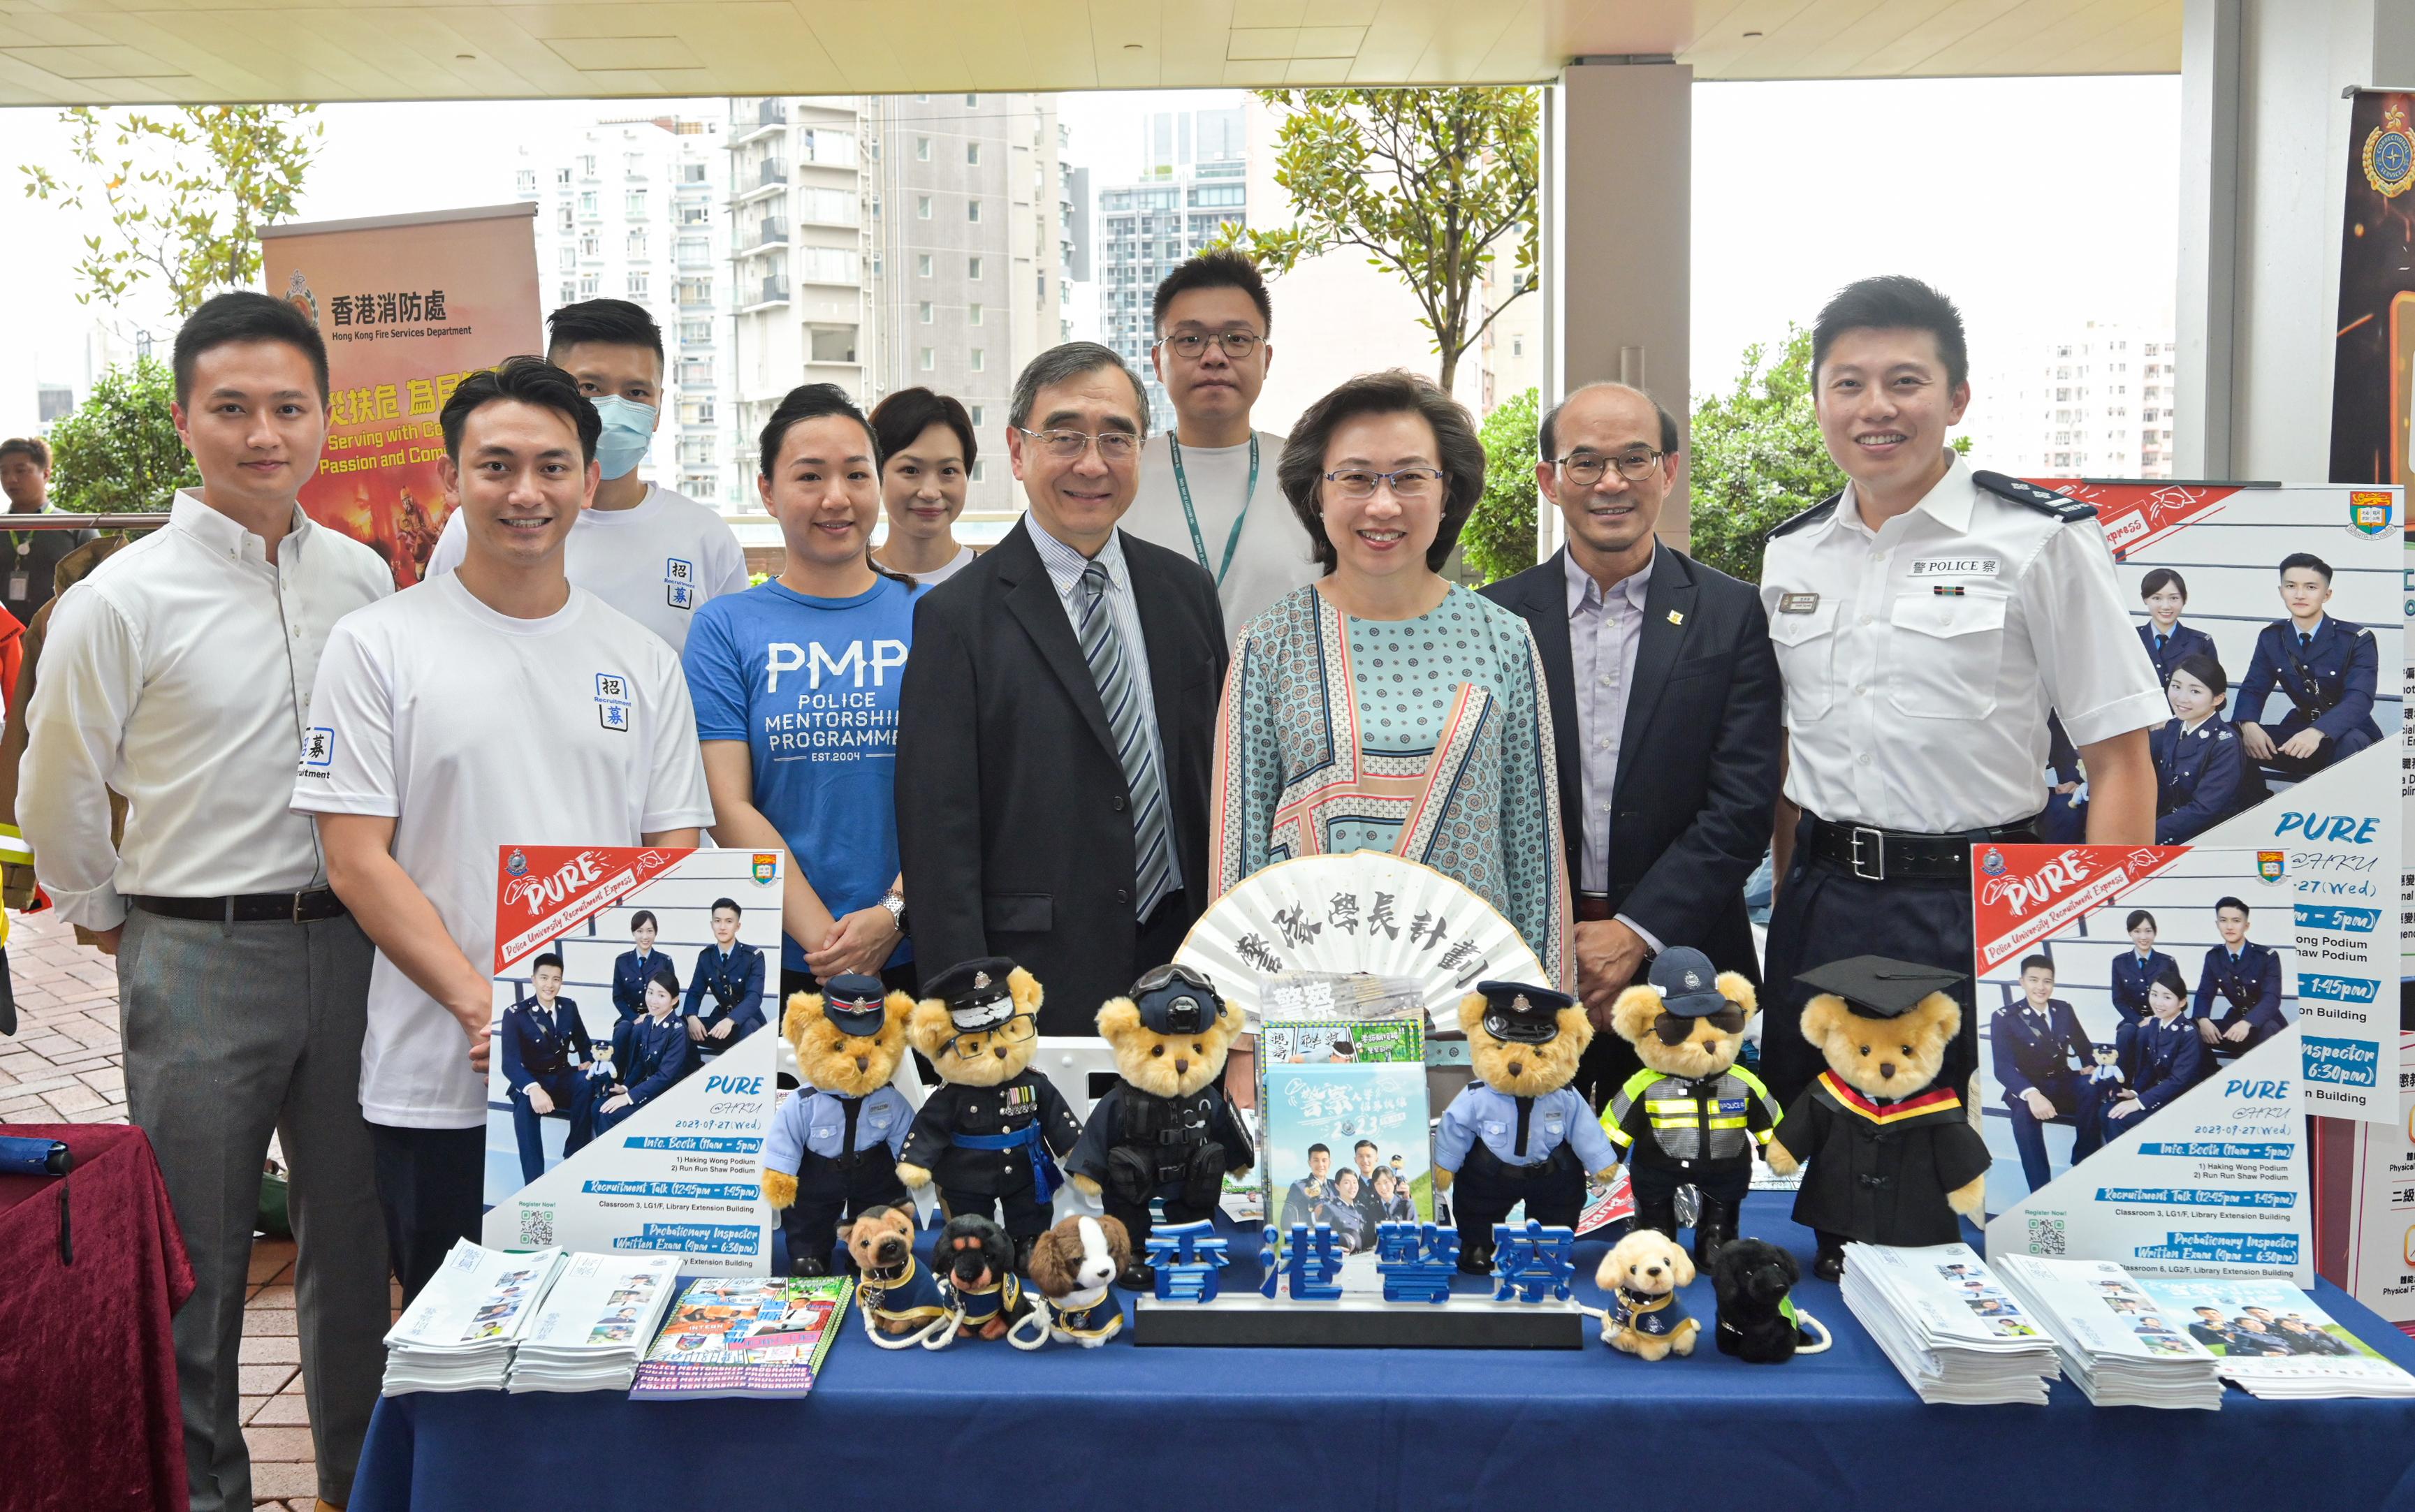 The Secretary for the Civil Service, Mrs Ingrid Yeung, visited the University of Hong Kong today (September 14). She toured the Government Career Fair being held at the campus with the Provost and Deputy Vice-Chancellor of the university, Professor Richard Wong, and encouraged students to join the civil service to serve the public. Mrs Yeung (front row, third right), Professor Wong (front row, fourth right) and the Dean of Student Affairs, Professor Samson Tse (front row, second right), are pictured with officers of the Hong Kong Police Force at the department's booth.